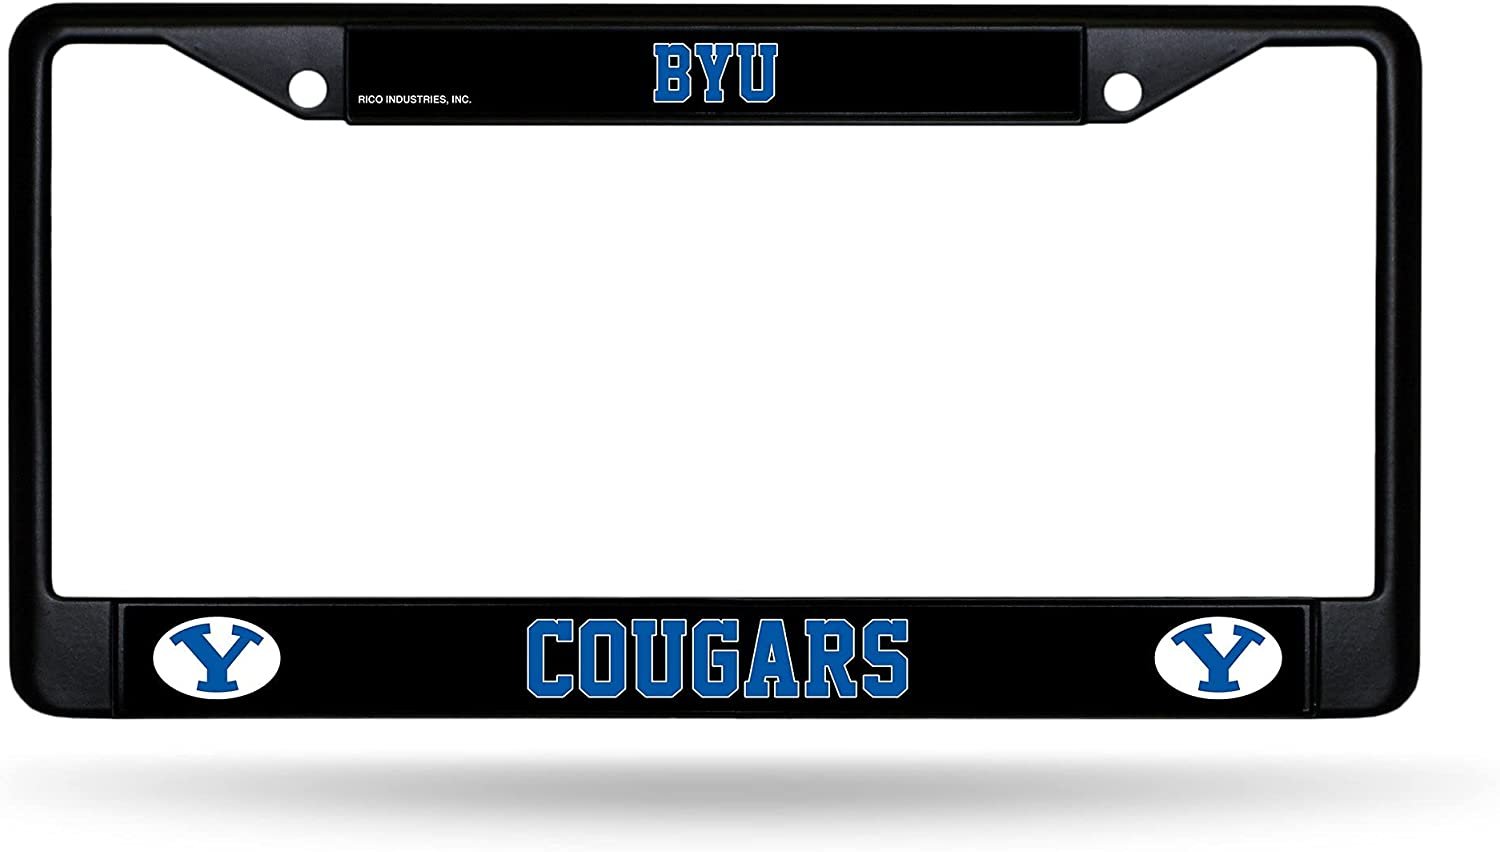 Brigham Young University Cougars BYU Black Metal License Plate Frame Chrome Tag Cover 6x12 Inch